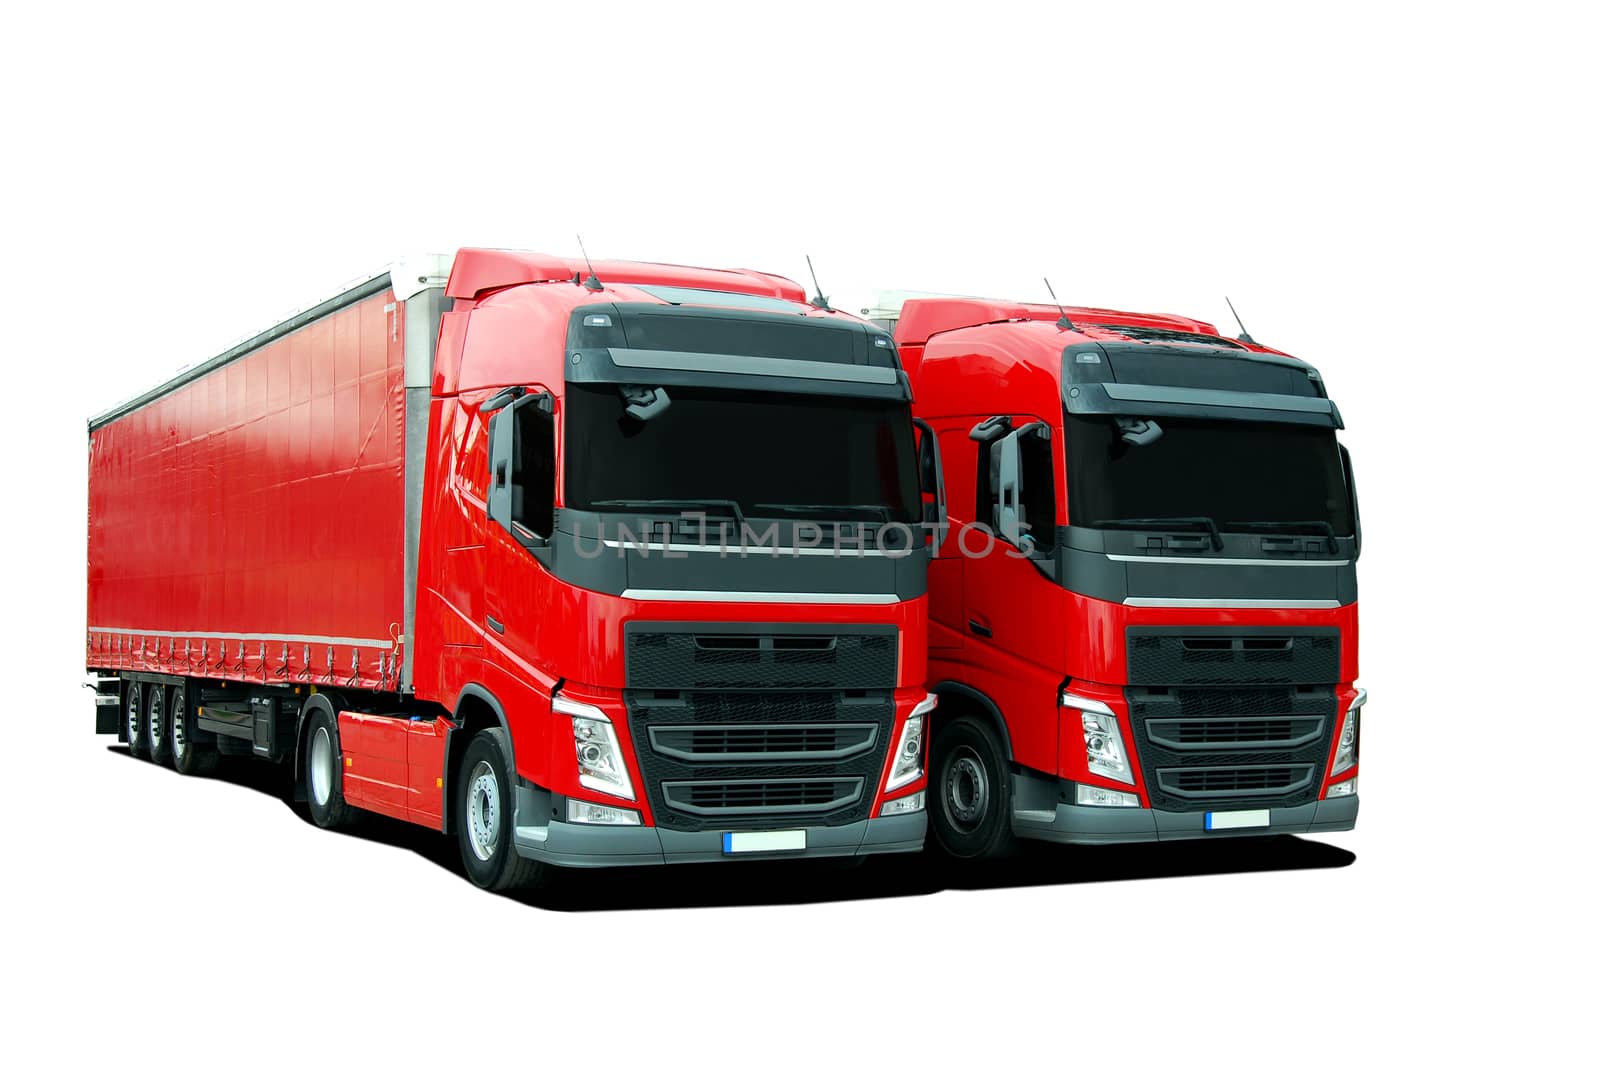 two truck with semi trailers by aselsa